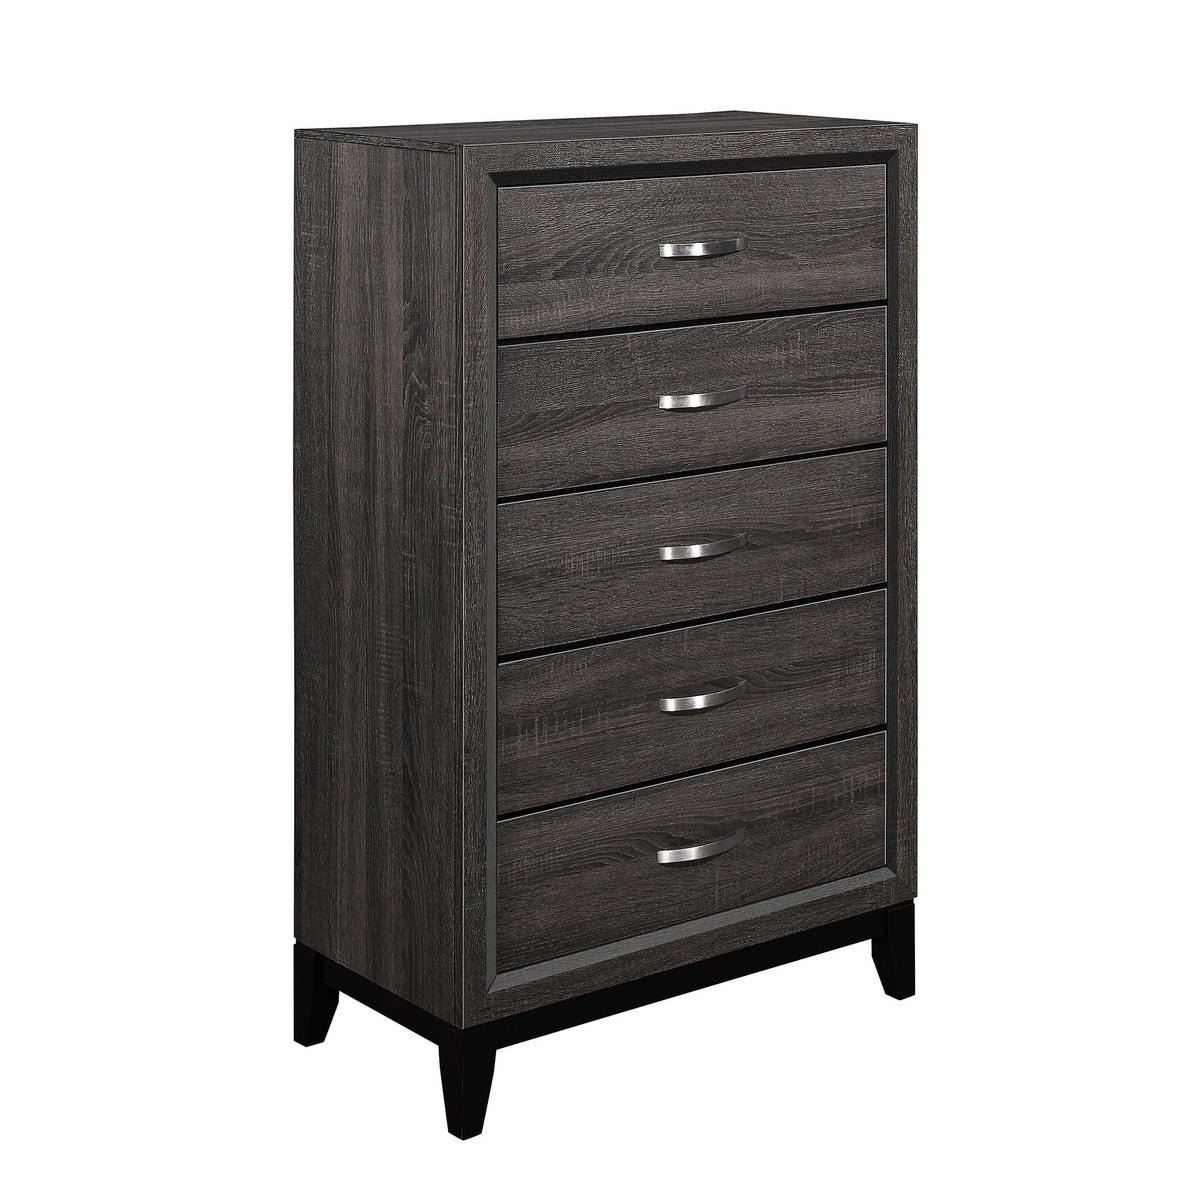 5 Drawer Wooden Chest with Grain Details and Chamfered Feet, Gray - BM219006